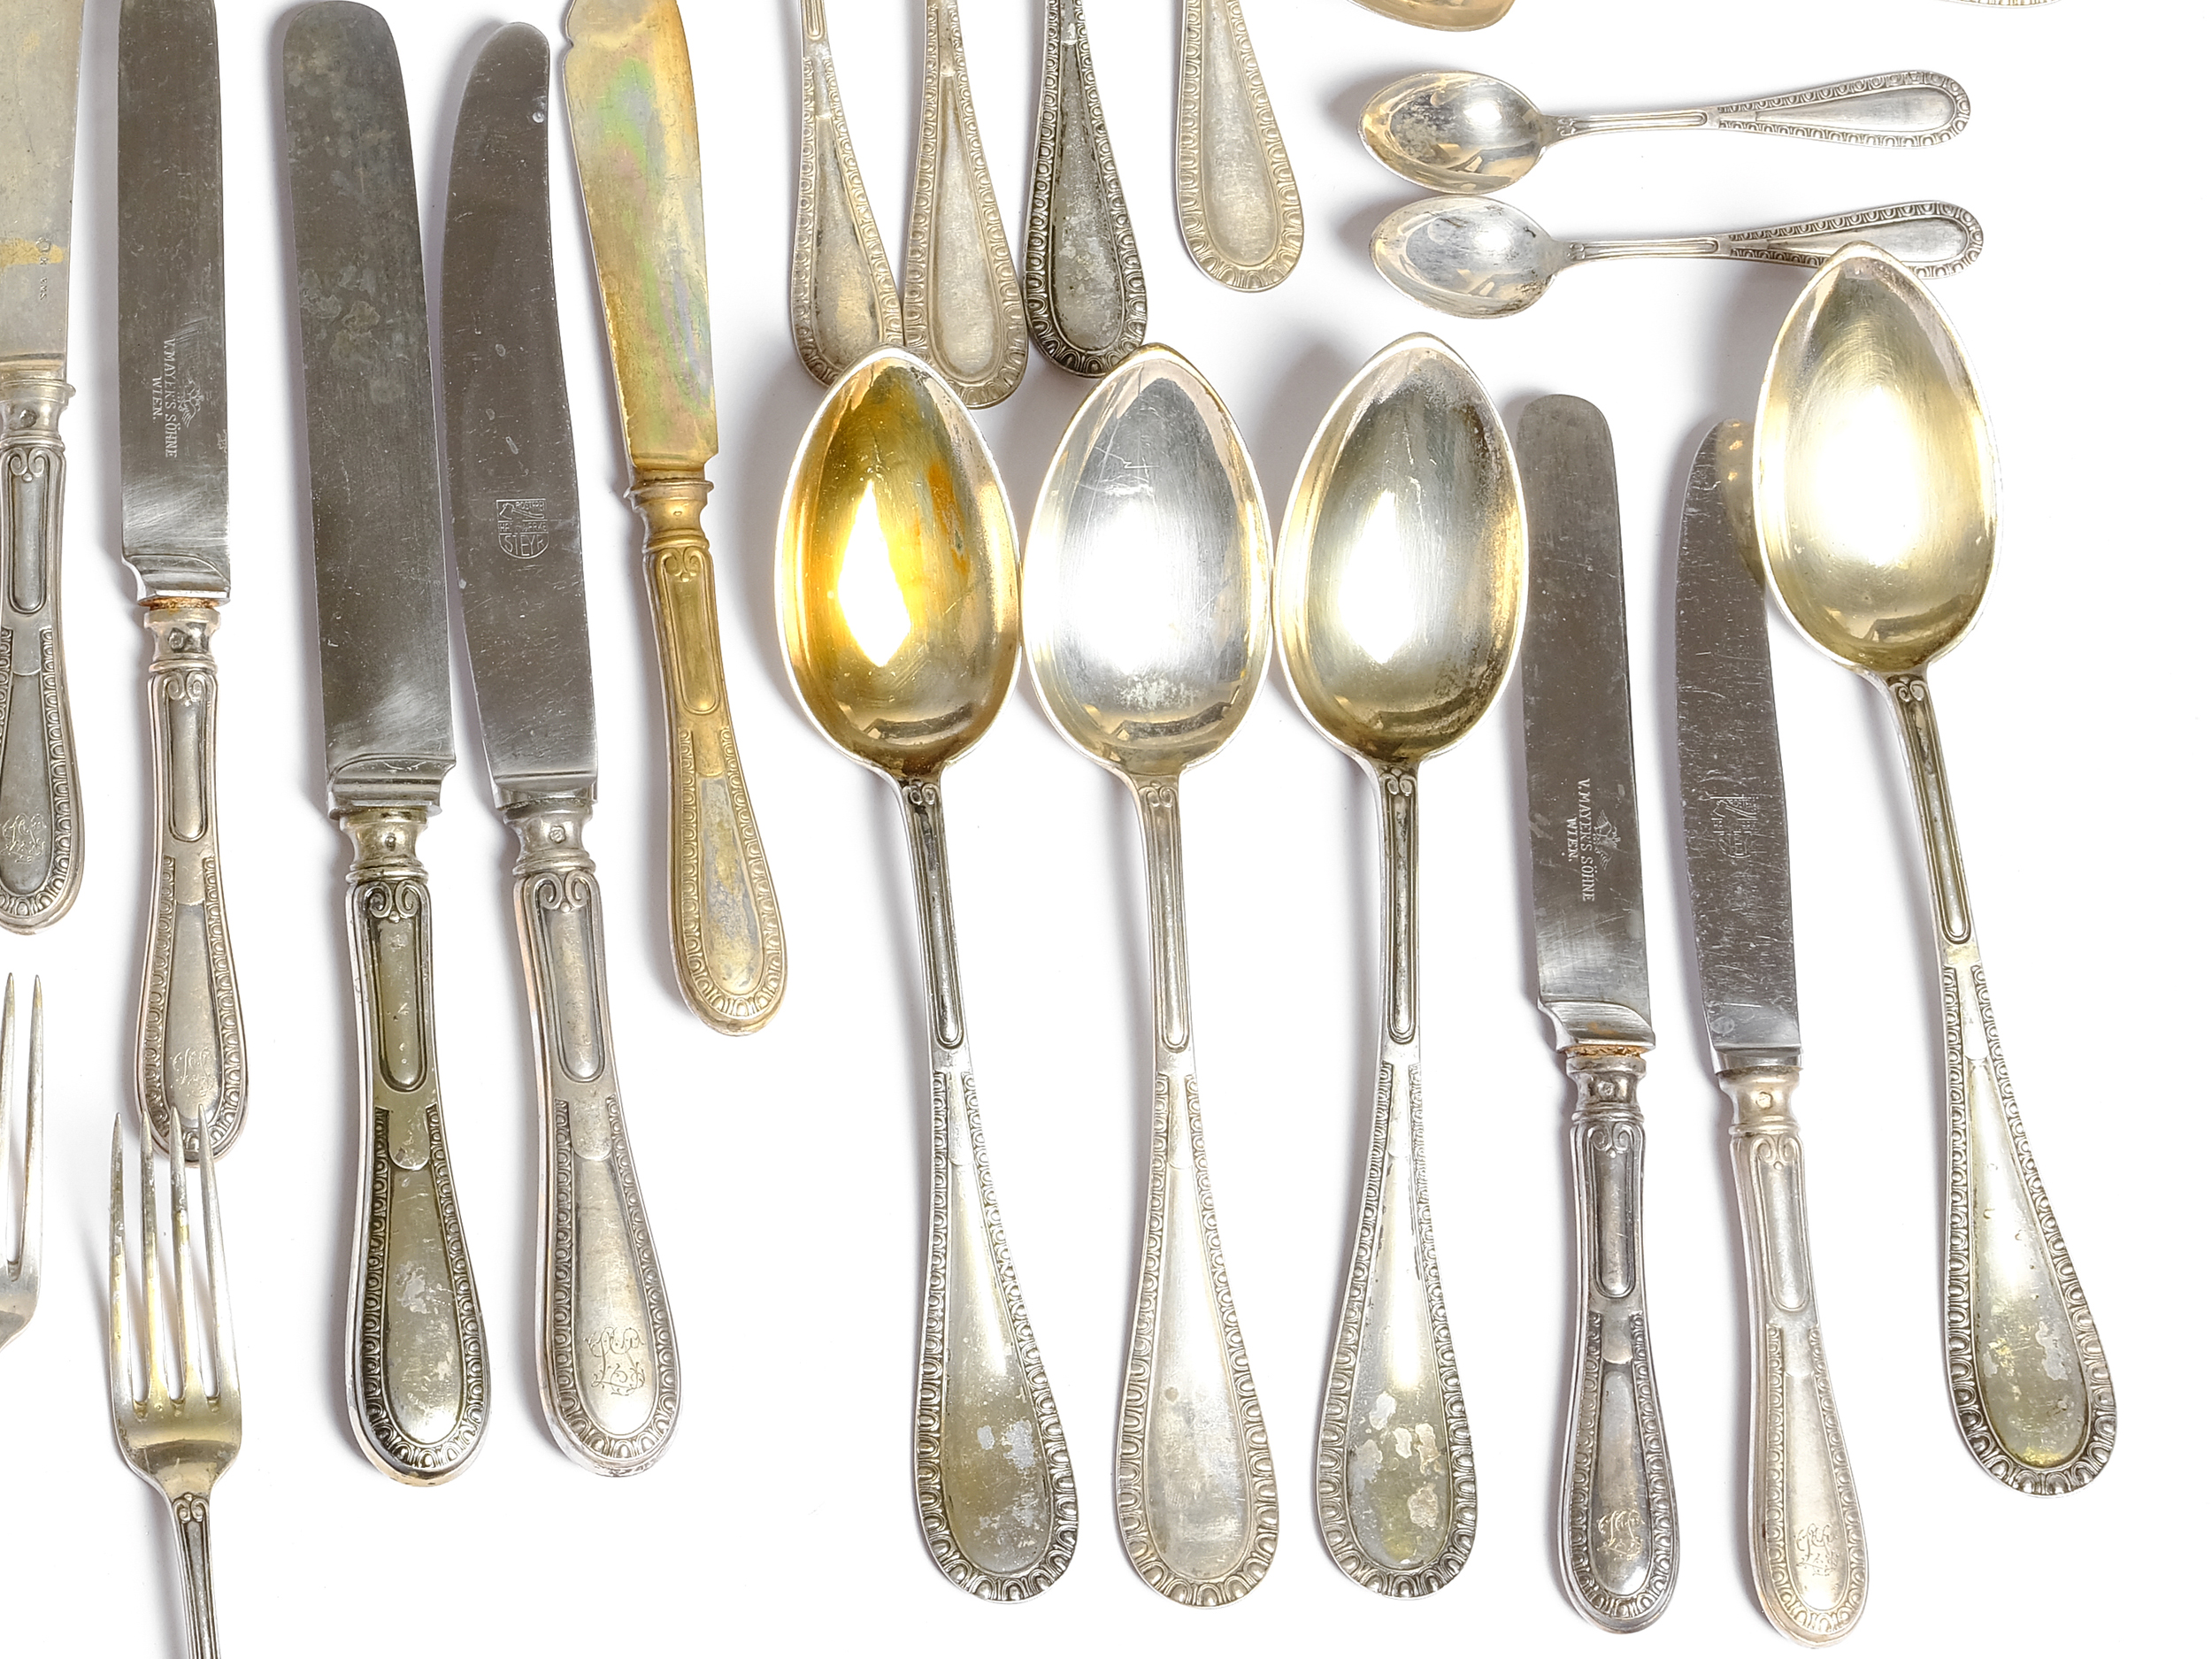 Large cutlery set, 93 pieces - Image 4 of 4